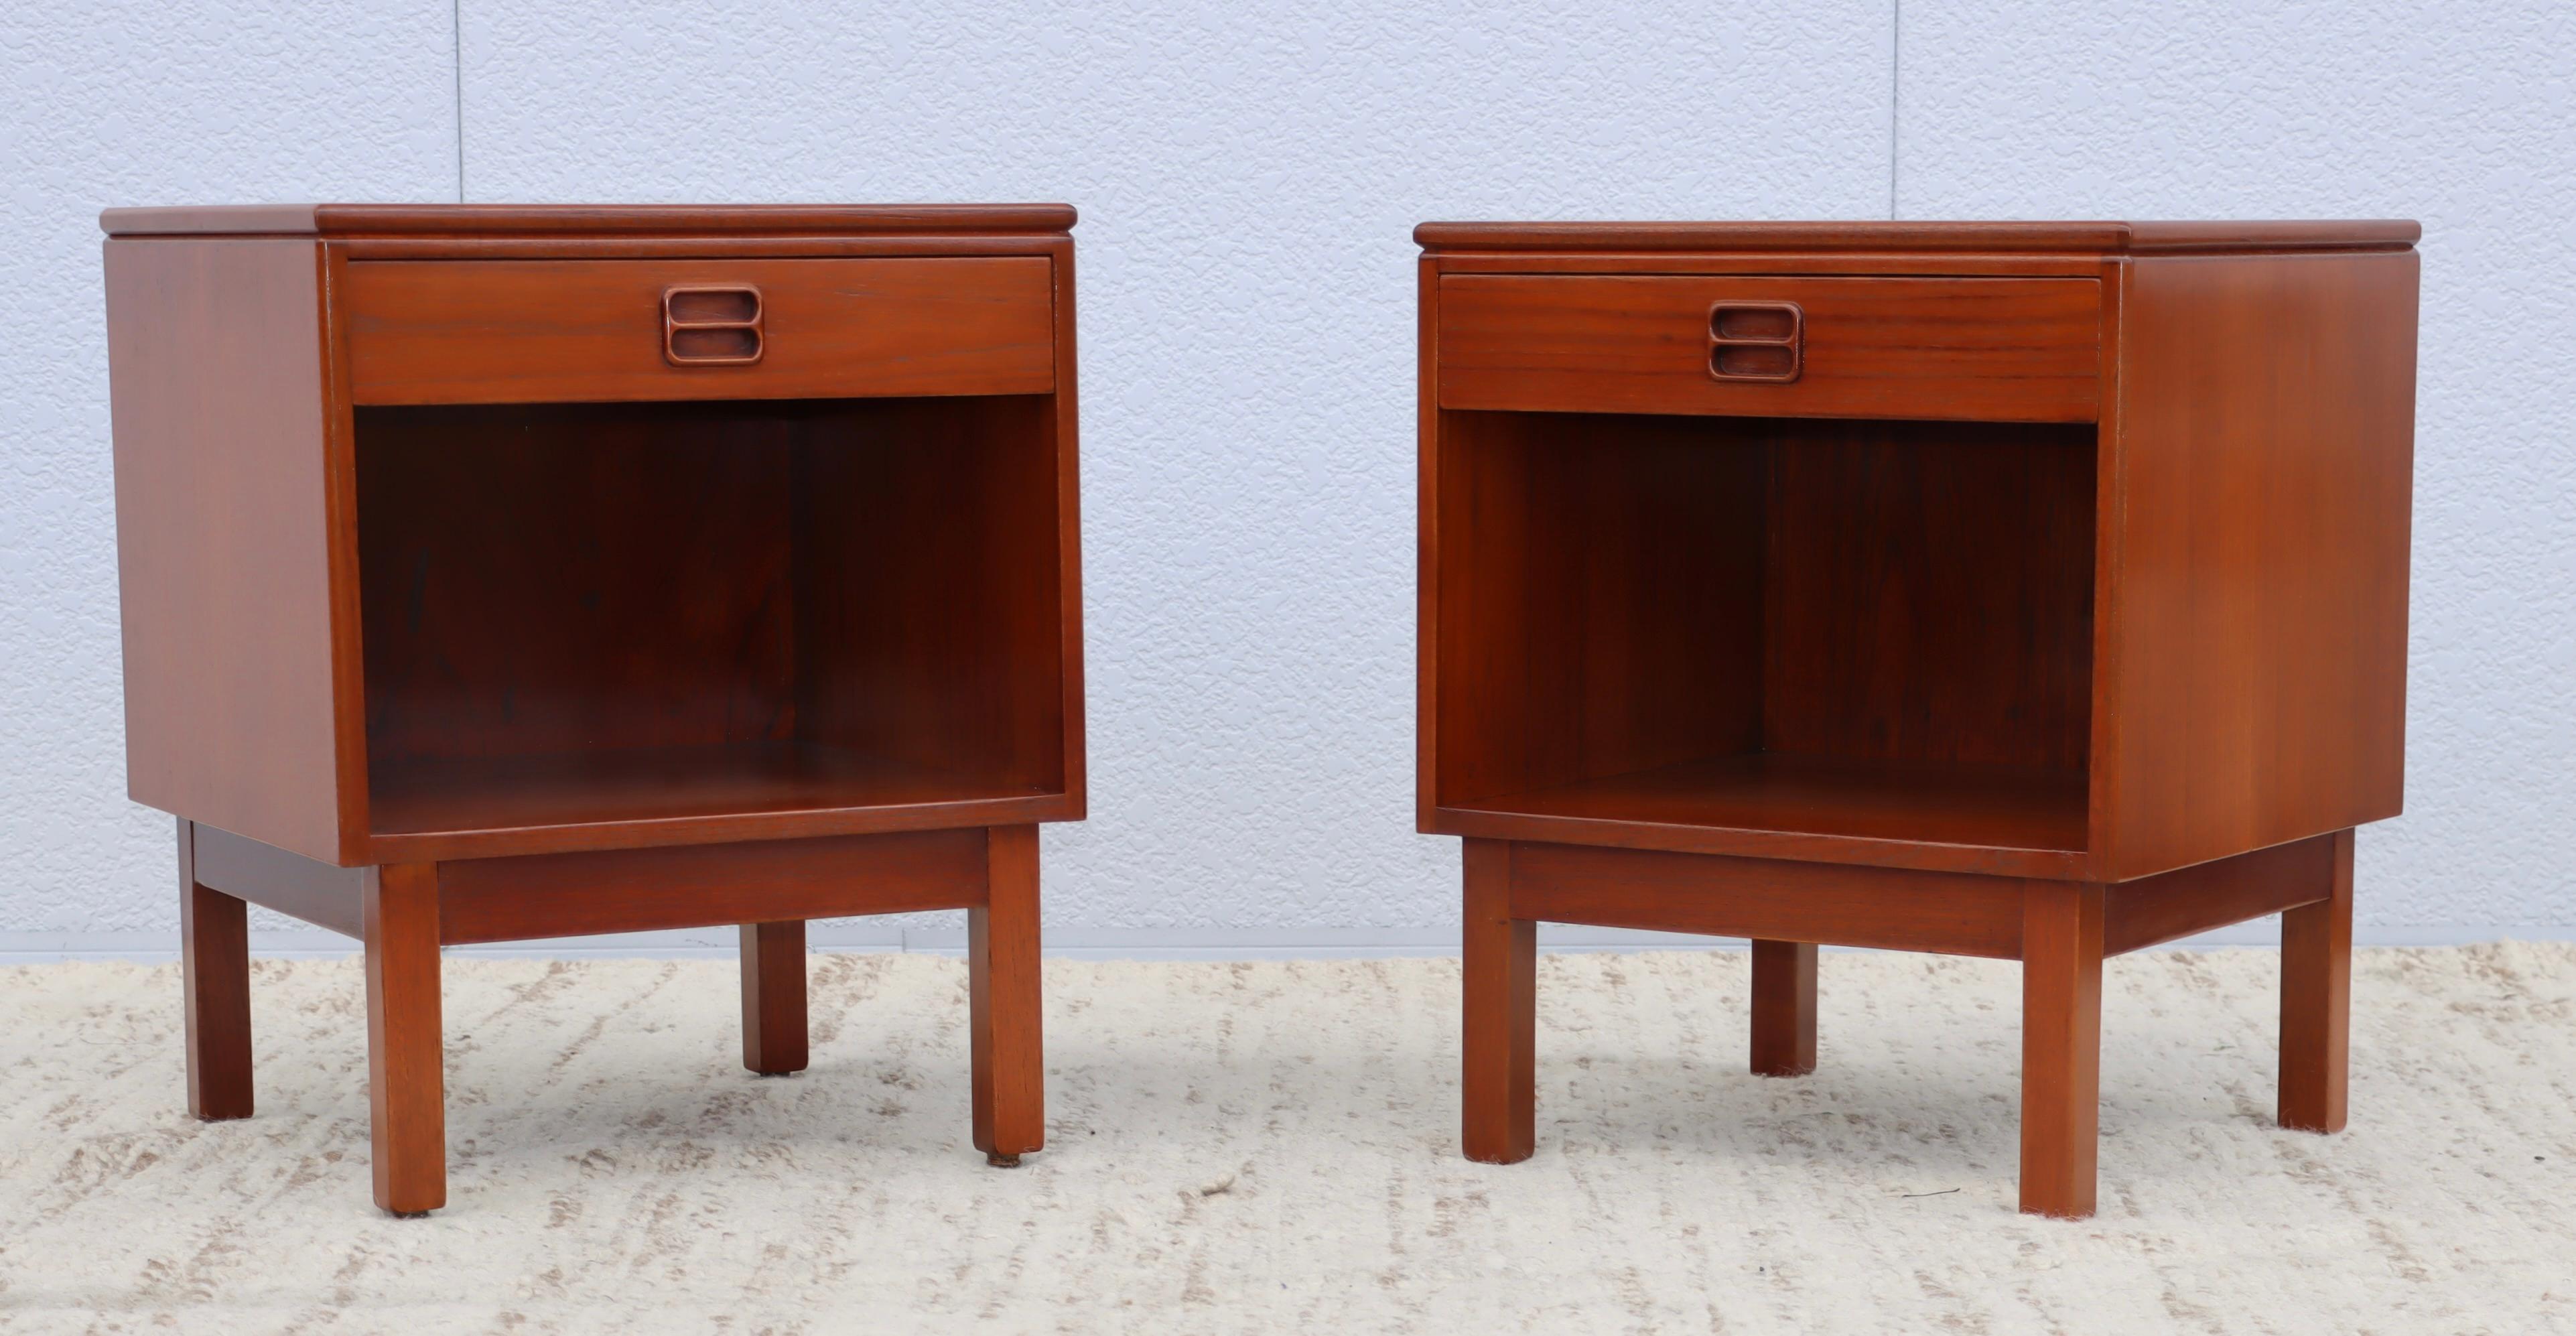 1960s Mid-Century Modern single drawer Danish teak night stands, fully restored with minor wear and patina due to age and use.